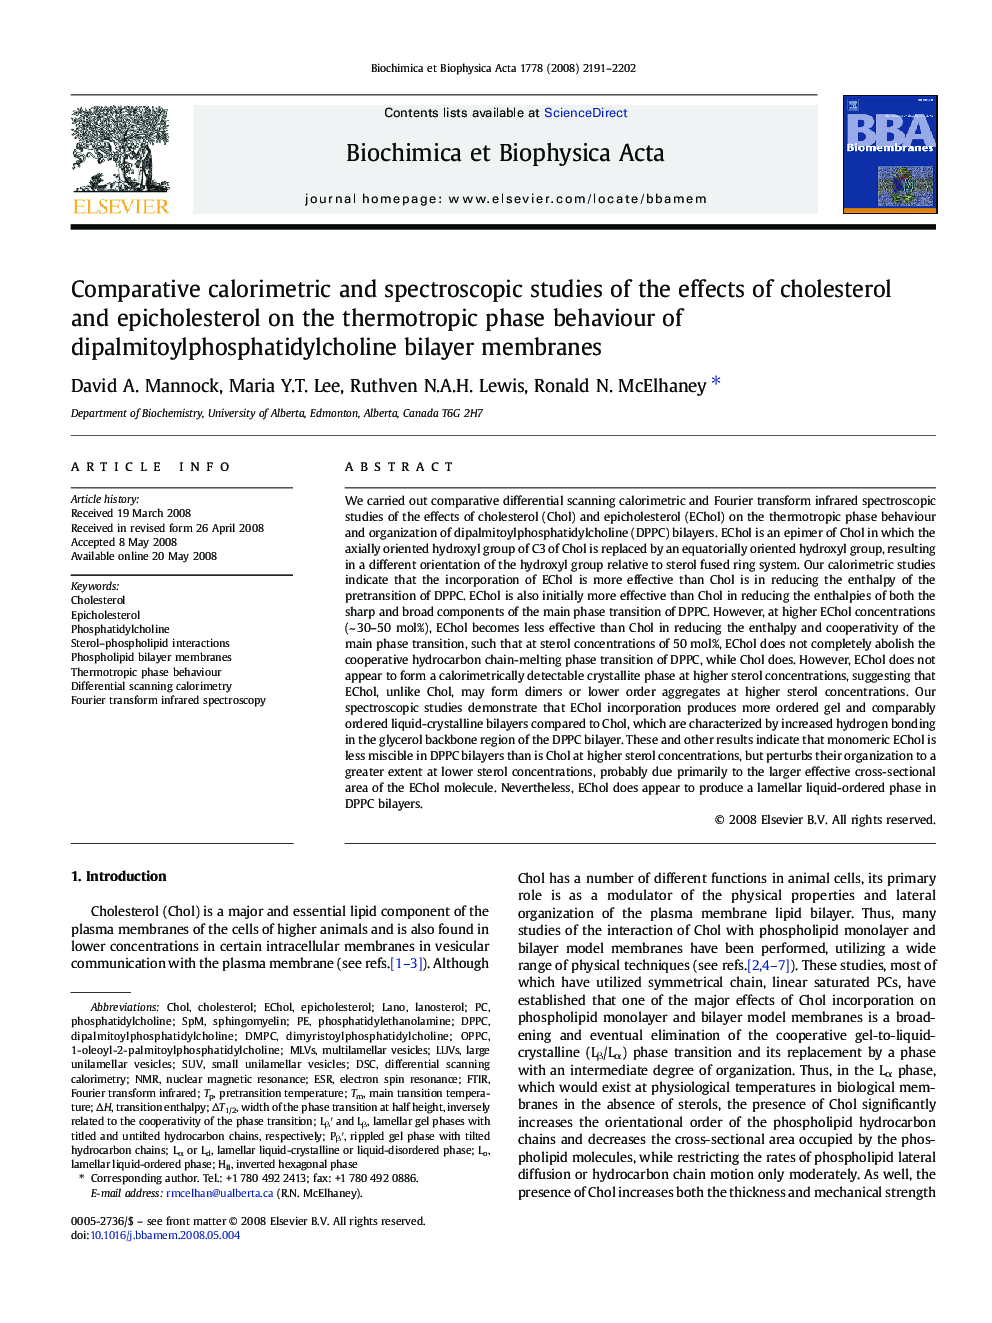 Comparative calorimetric and spectroscopic studies of the effects of cholesterol and epicholesterol on the thermotropic phase behaviour of dipalmitoylphosphatidylcholine bilayer membranes